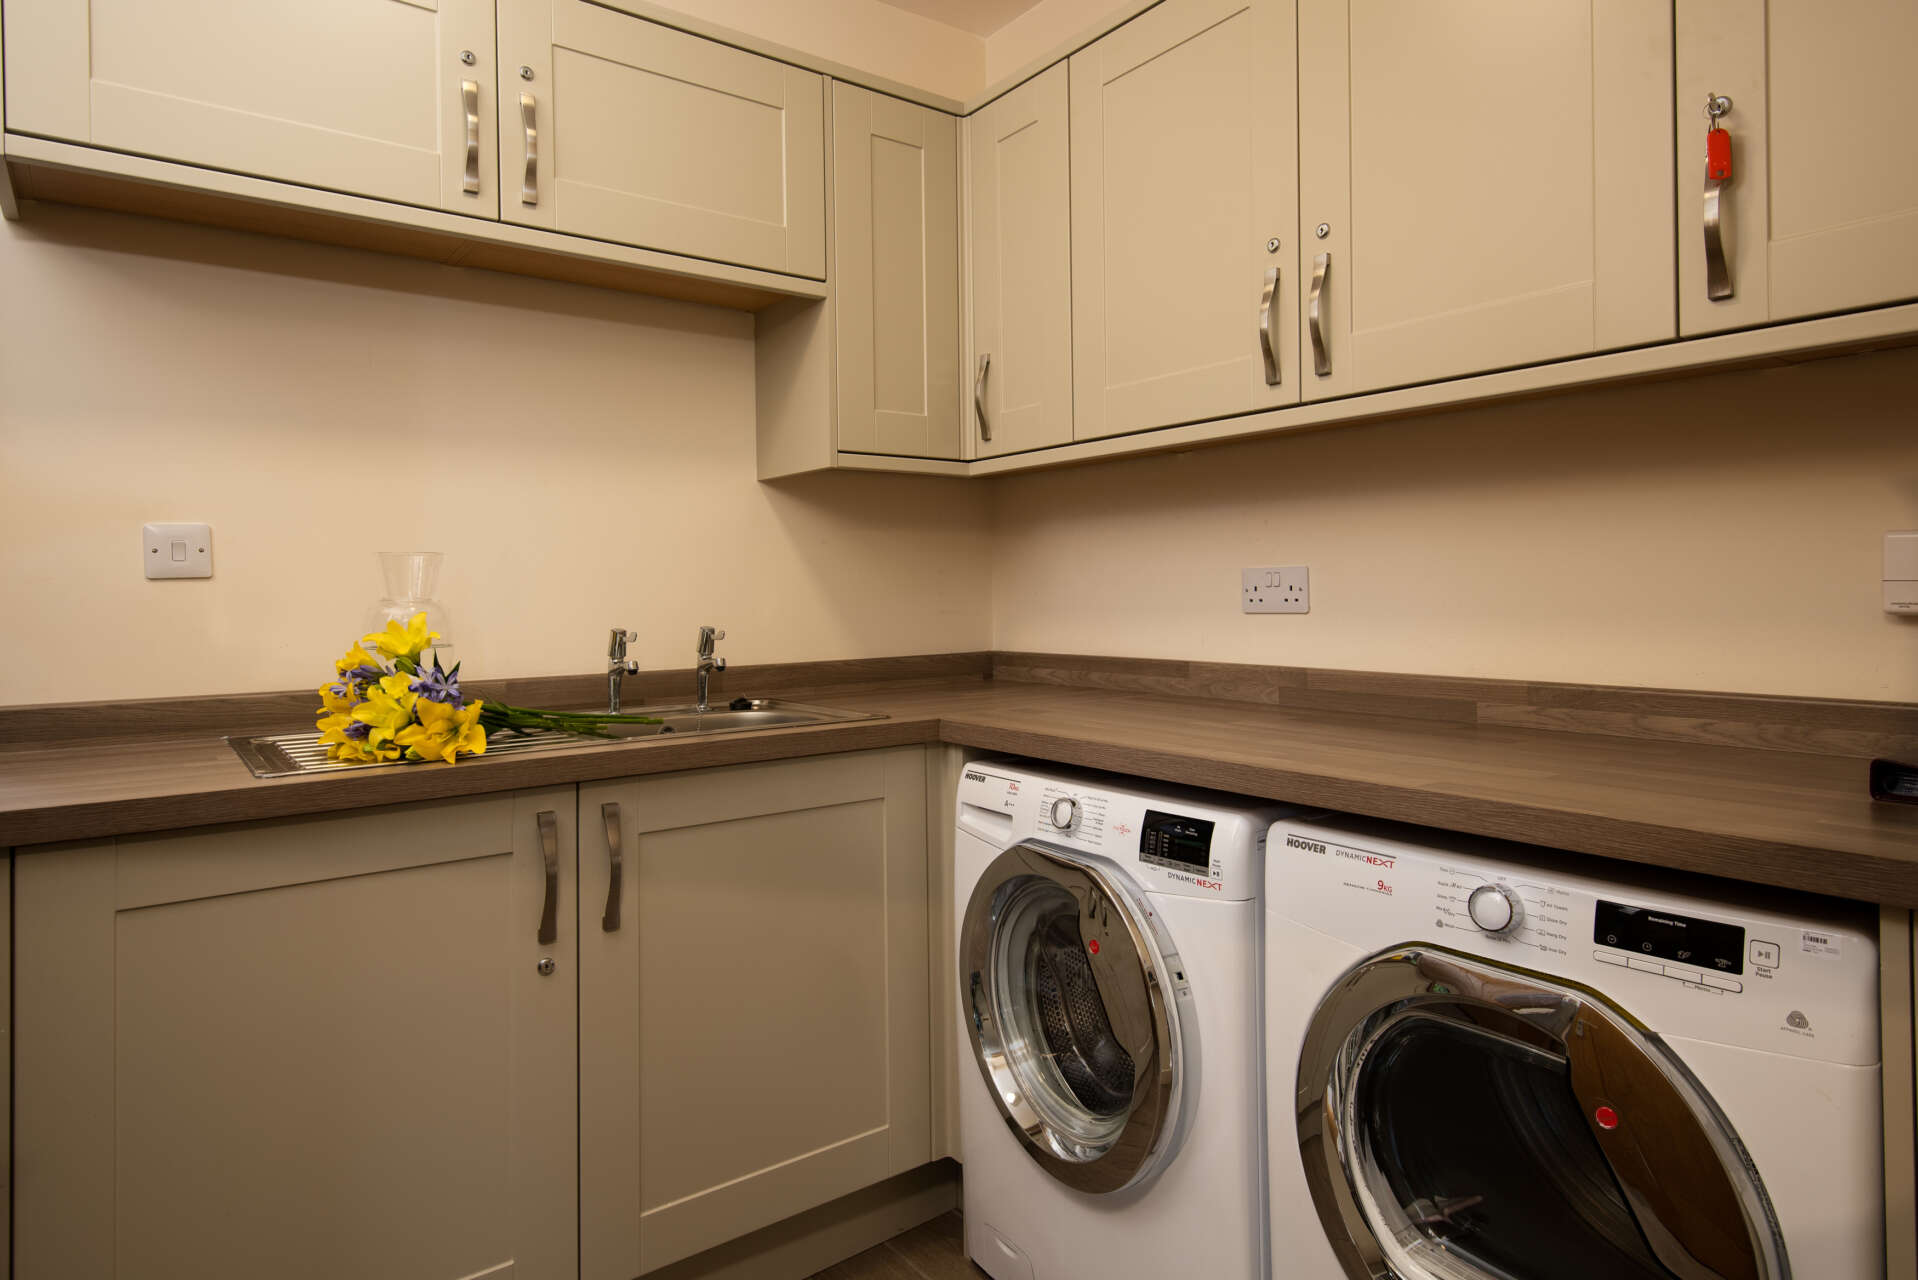 Utility Room showing Washing Machine and Tumble Drier - Vesta View